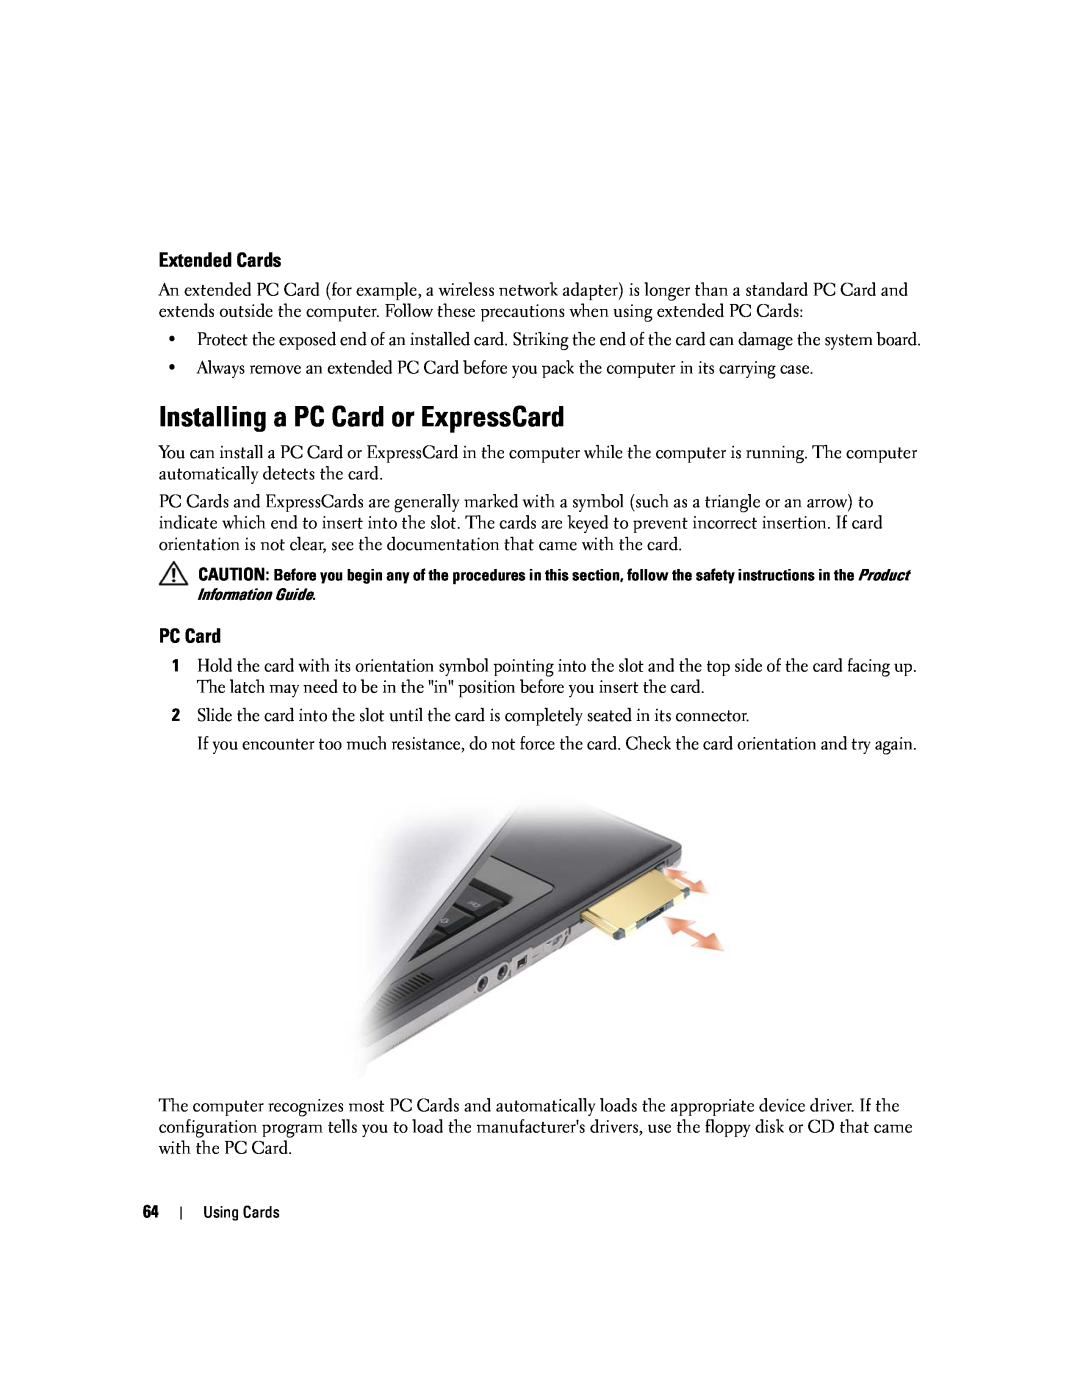 Dell PP24L manual Installing a PC Card or ExpressCard, Extended Cards 